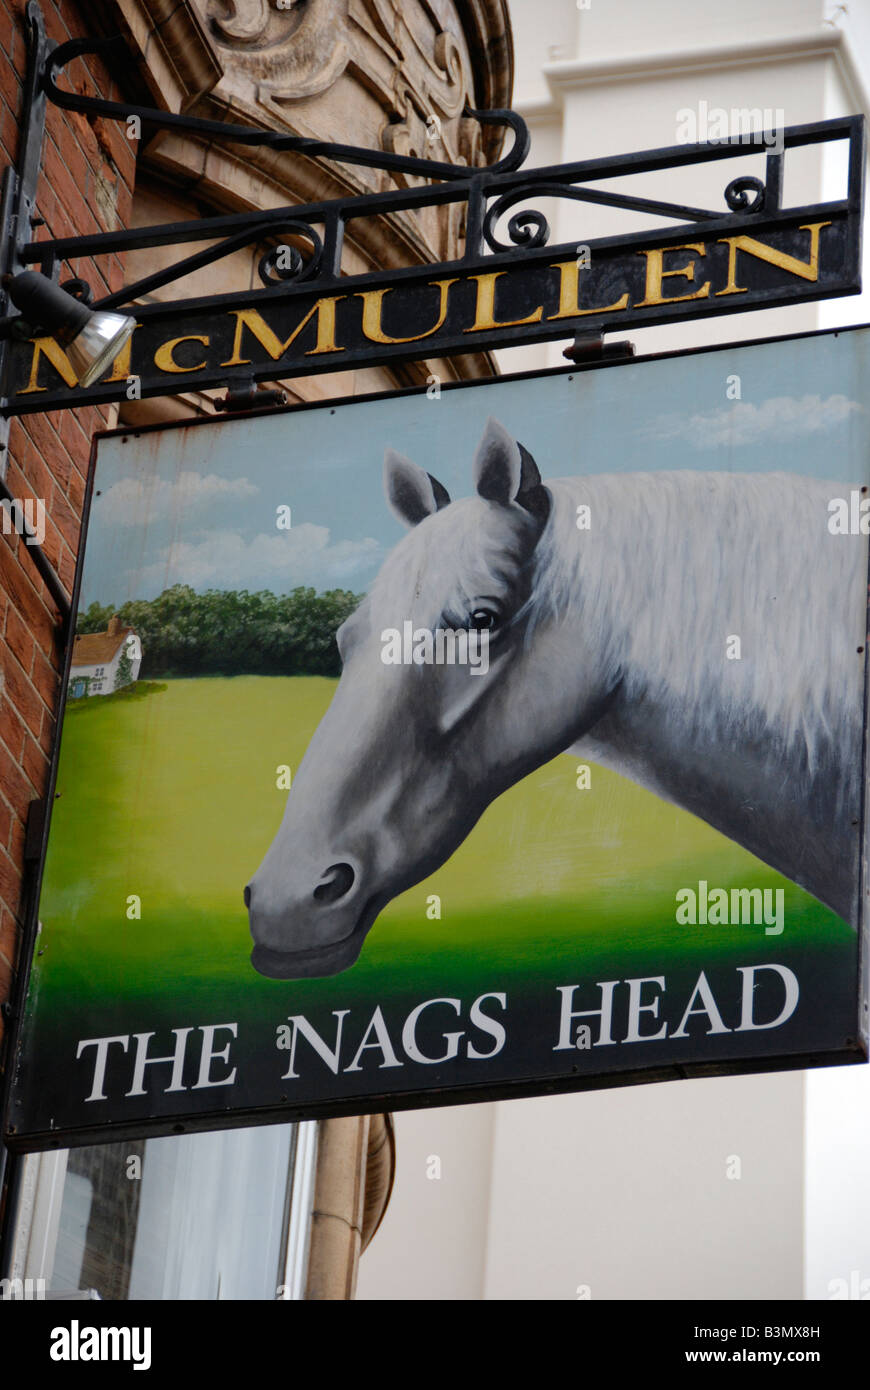 The Nags Head pub sign Covent Garden London England Stock Photo